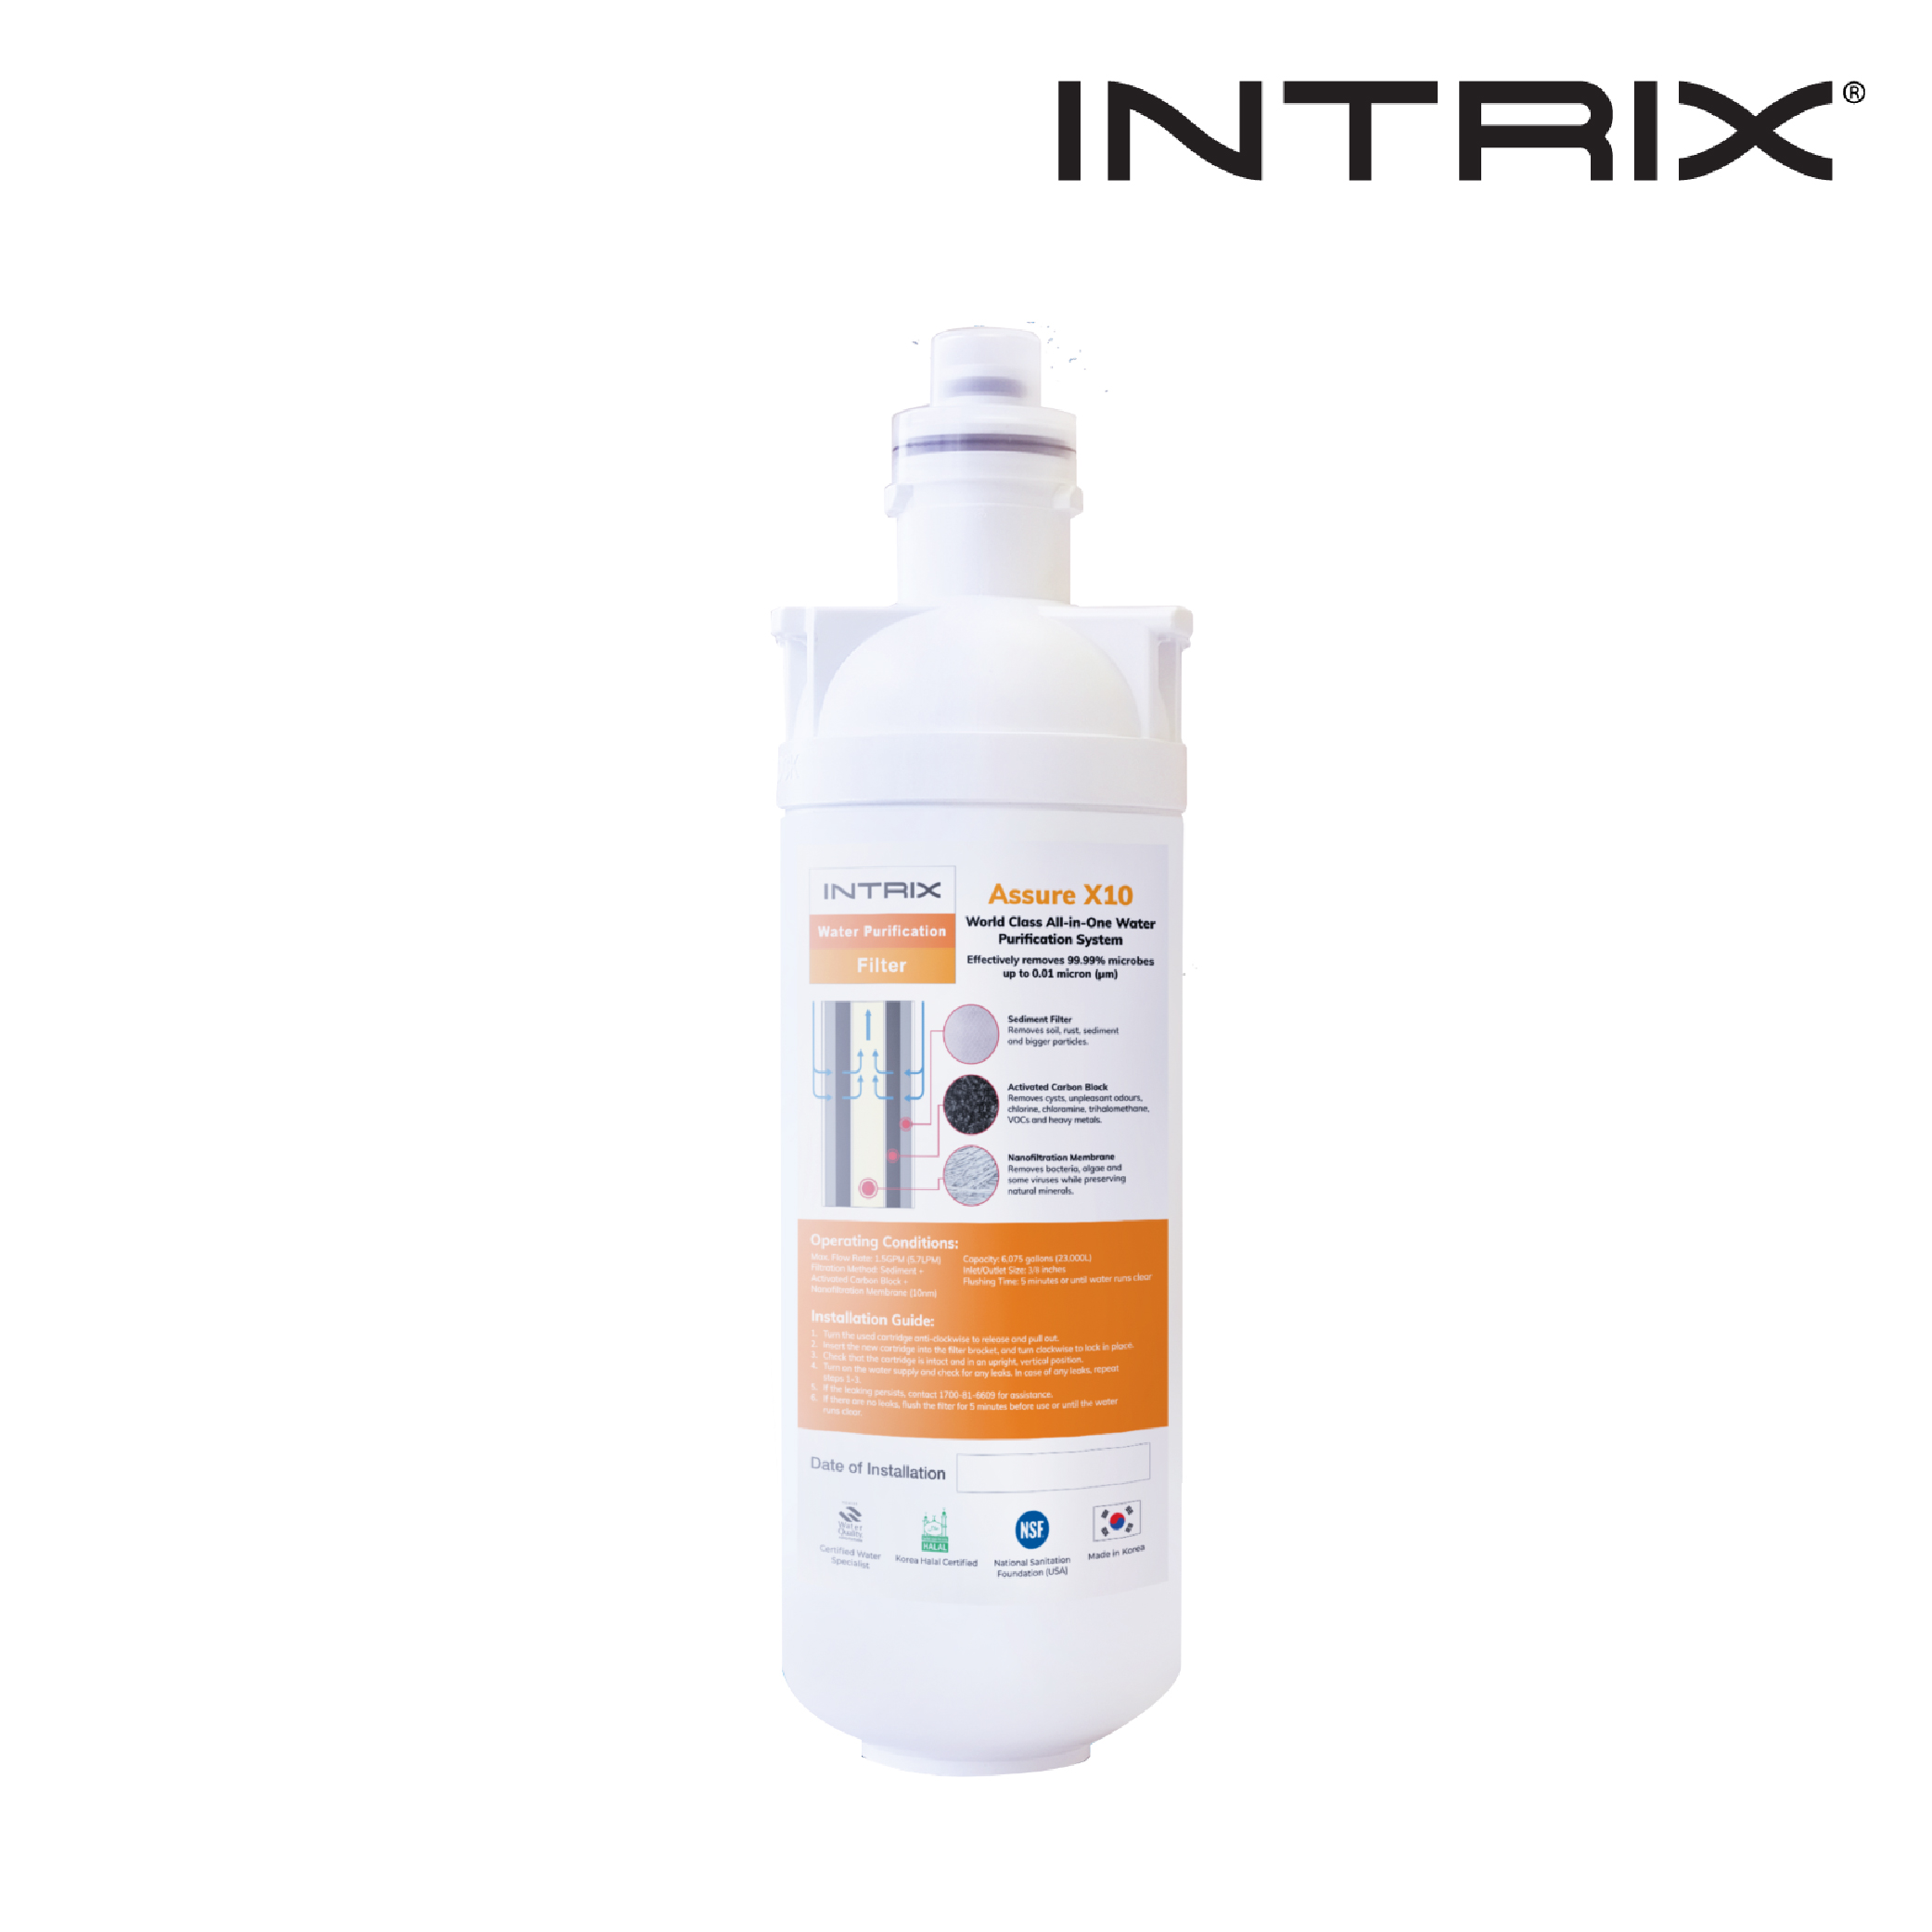 Intrix Assure X10 Filter Replacement - 23,000L or 1 Year Lifespan